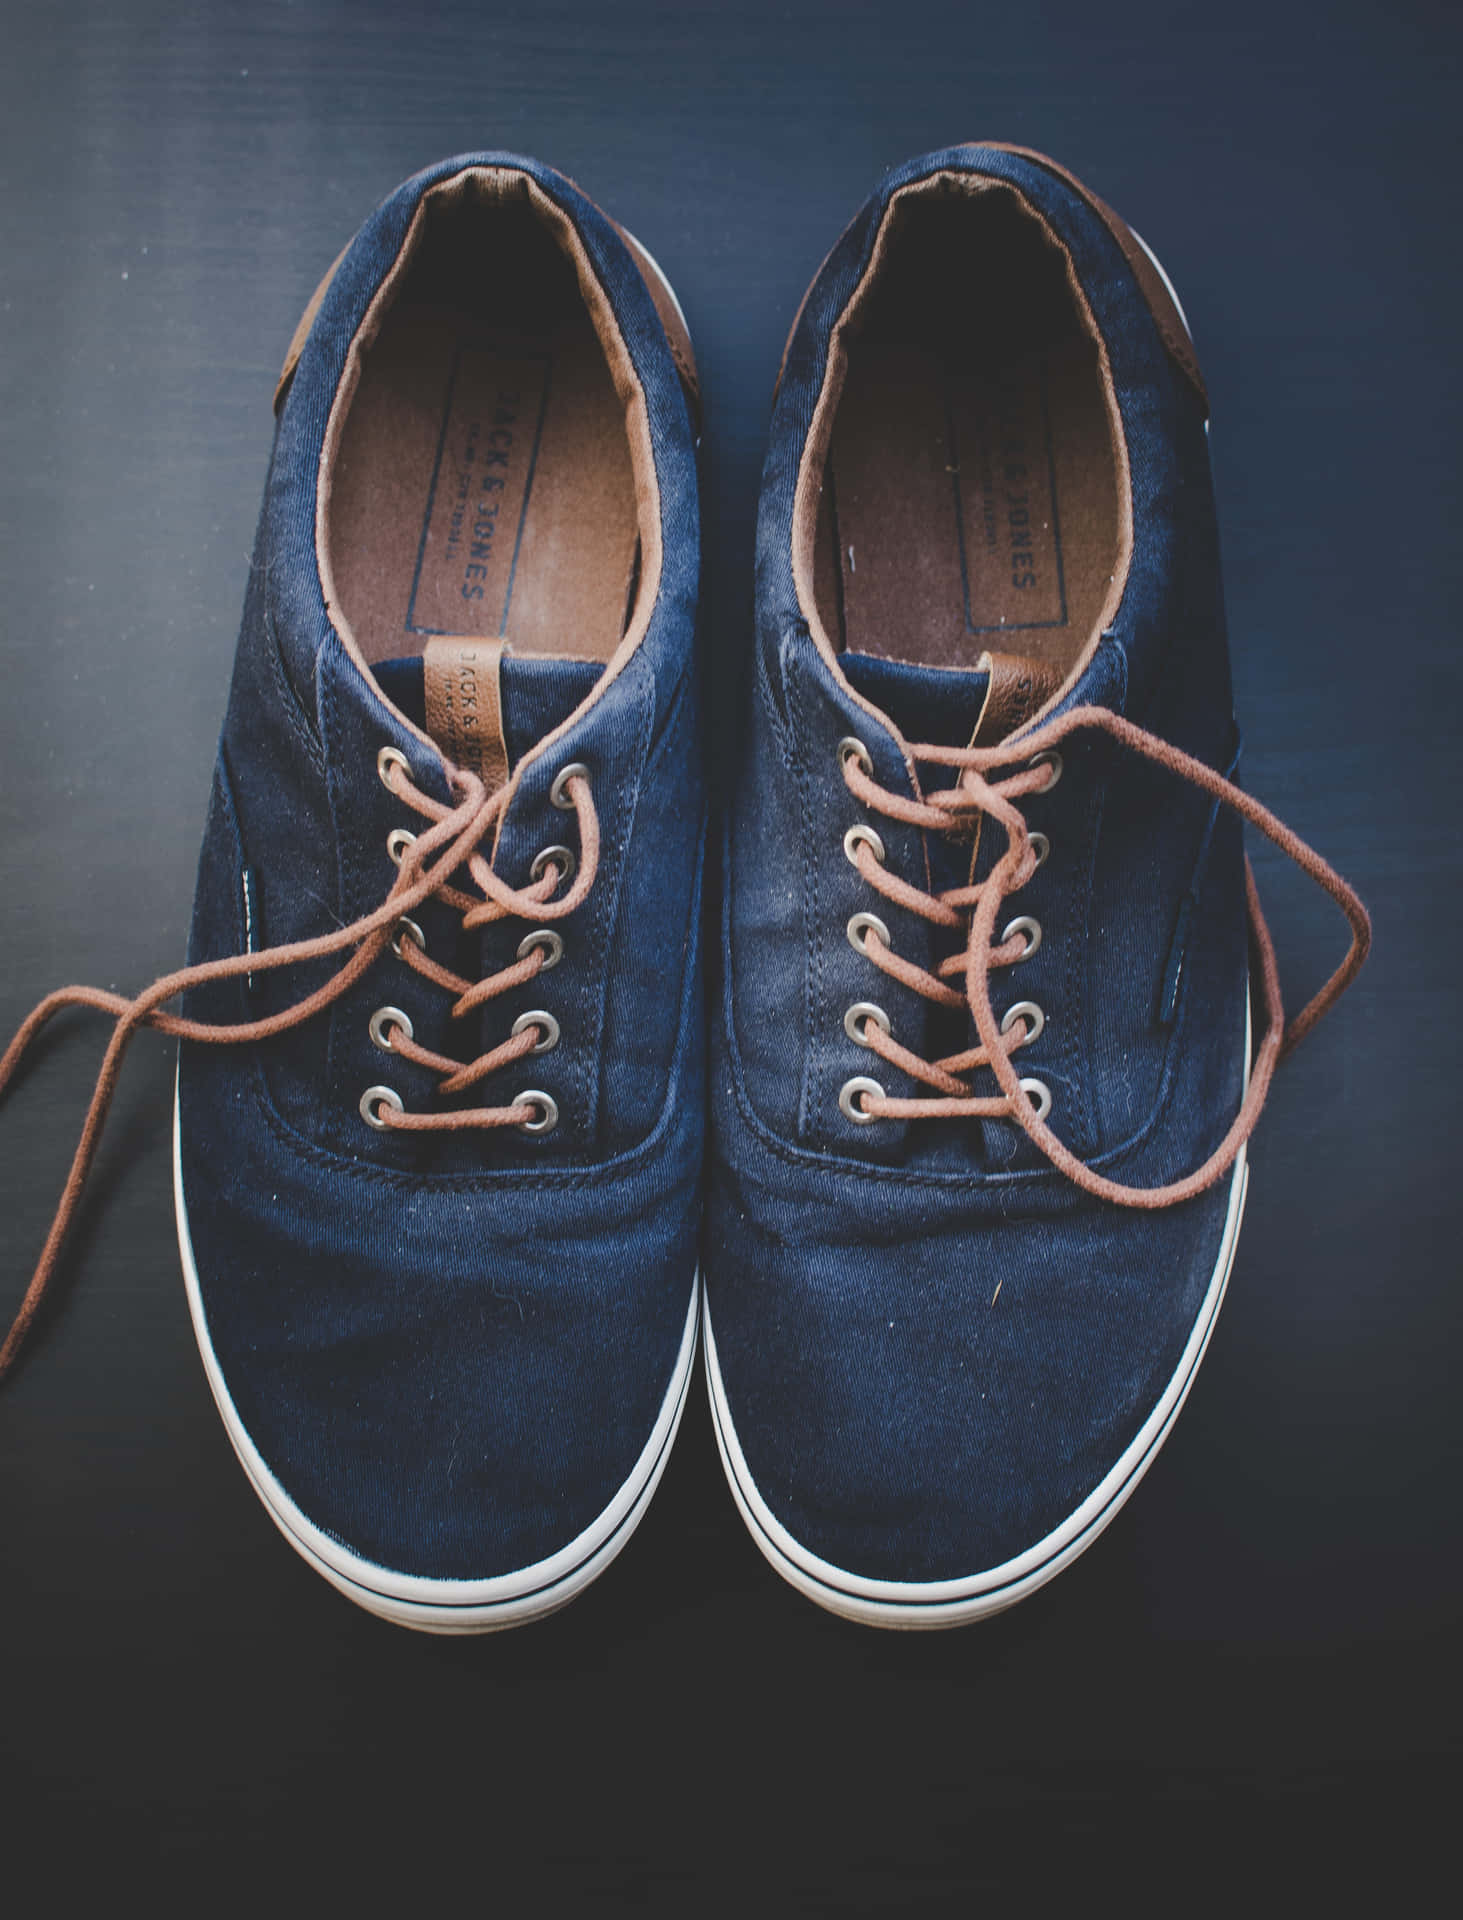 Perfectly stylish navy blue shoes Wallpaper